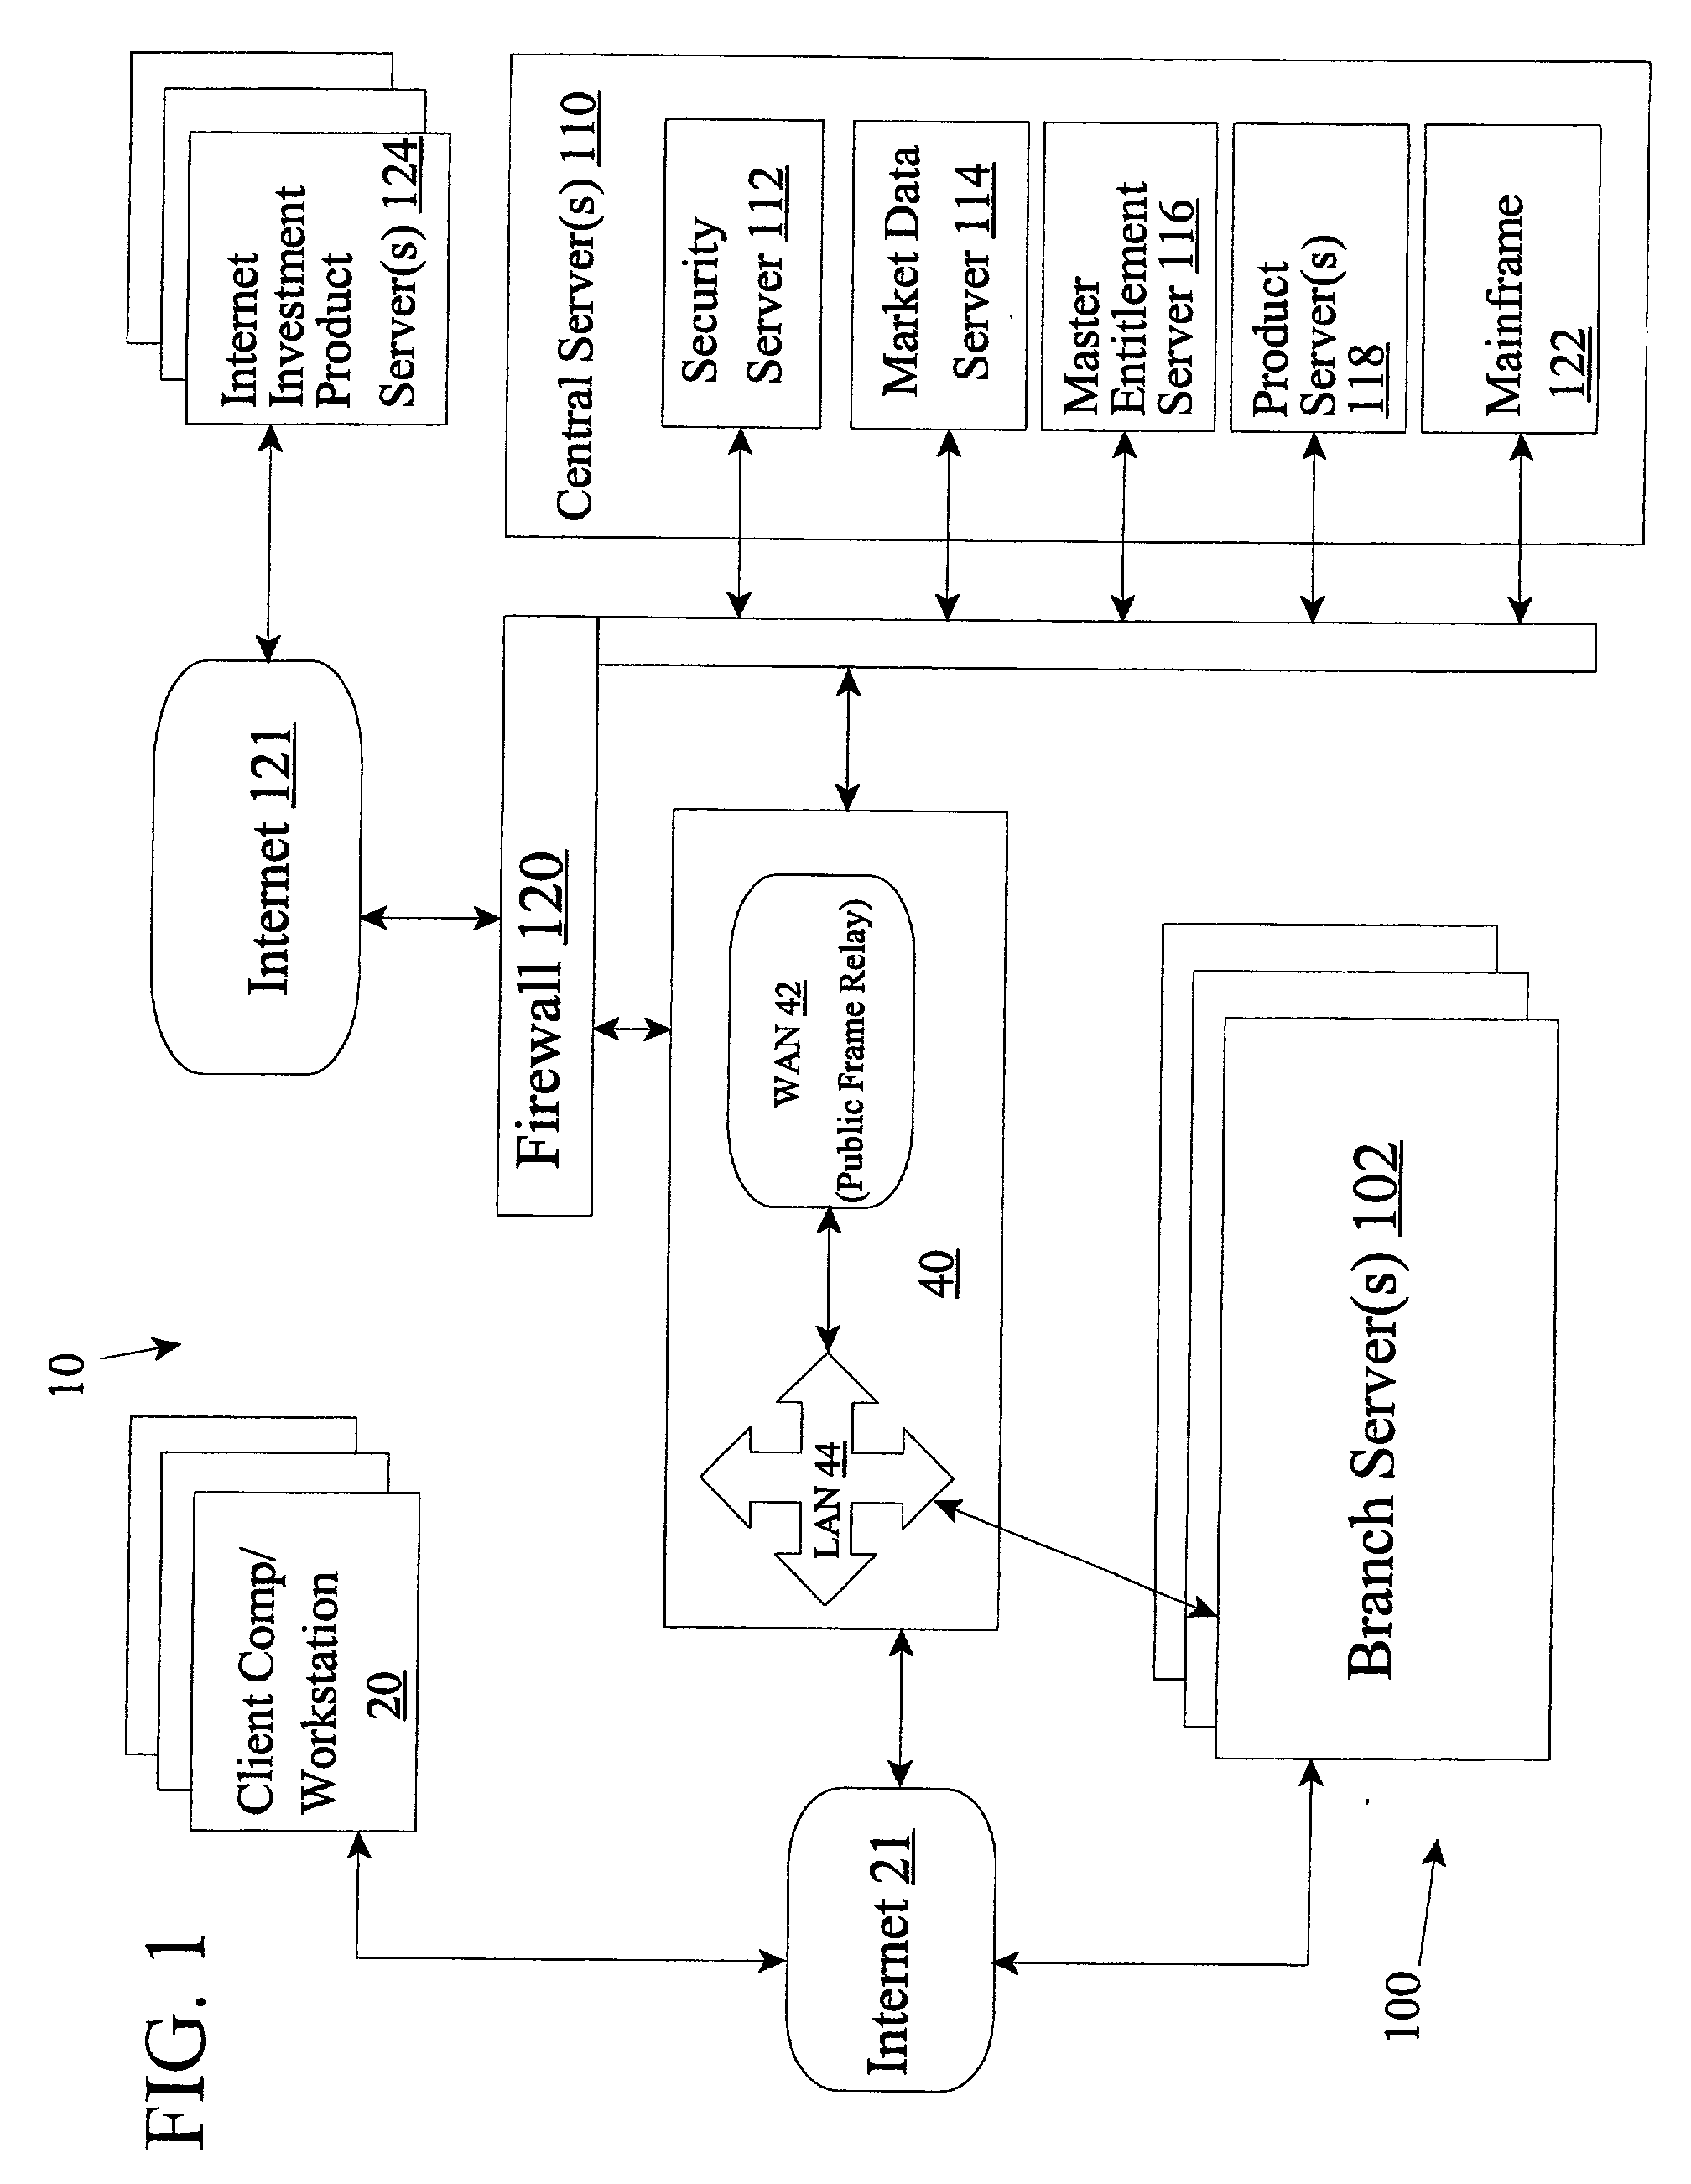 Browser interface and network based financial service system